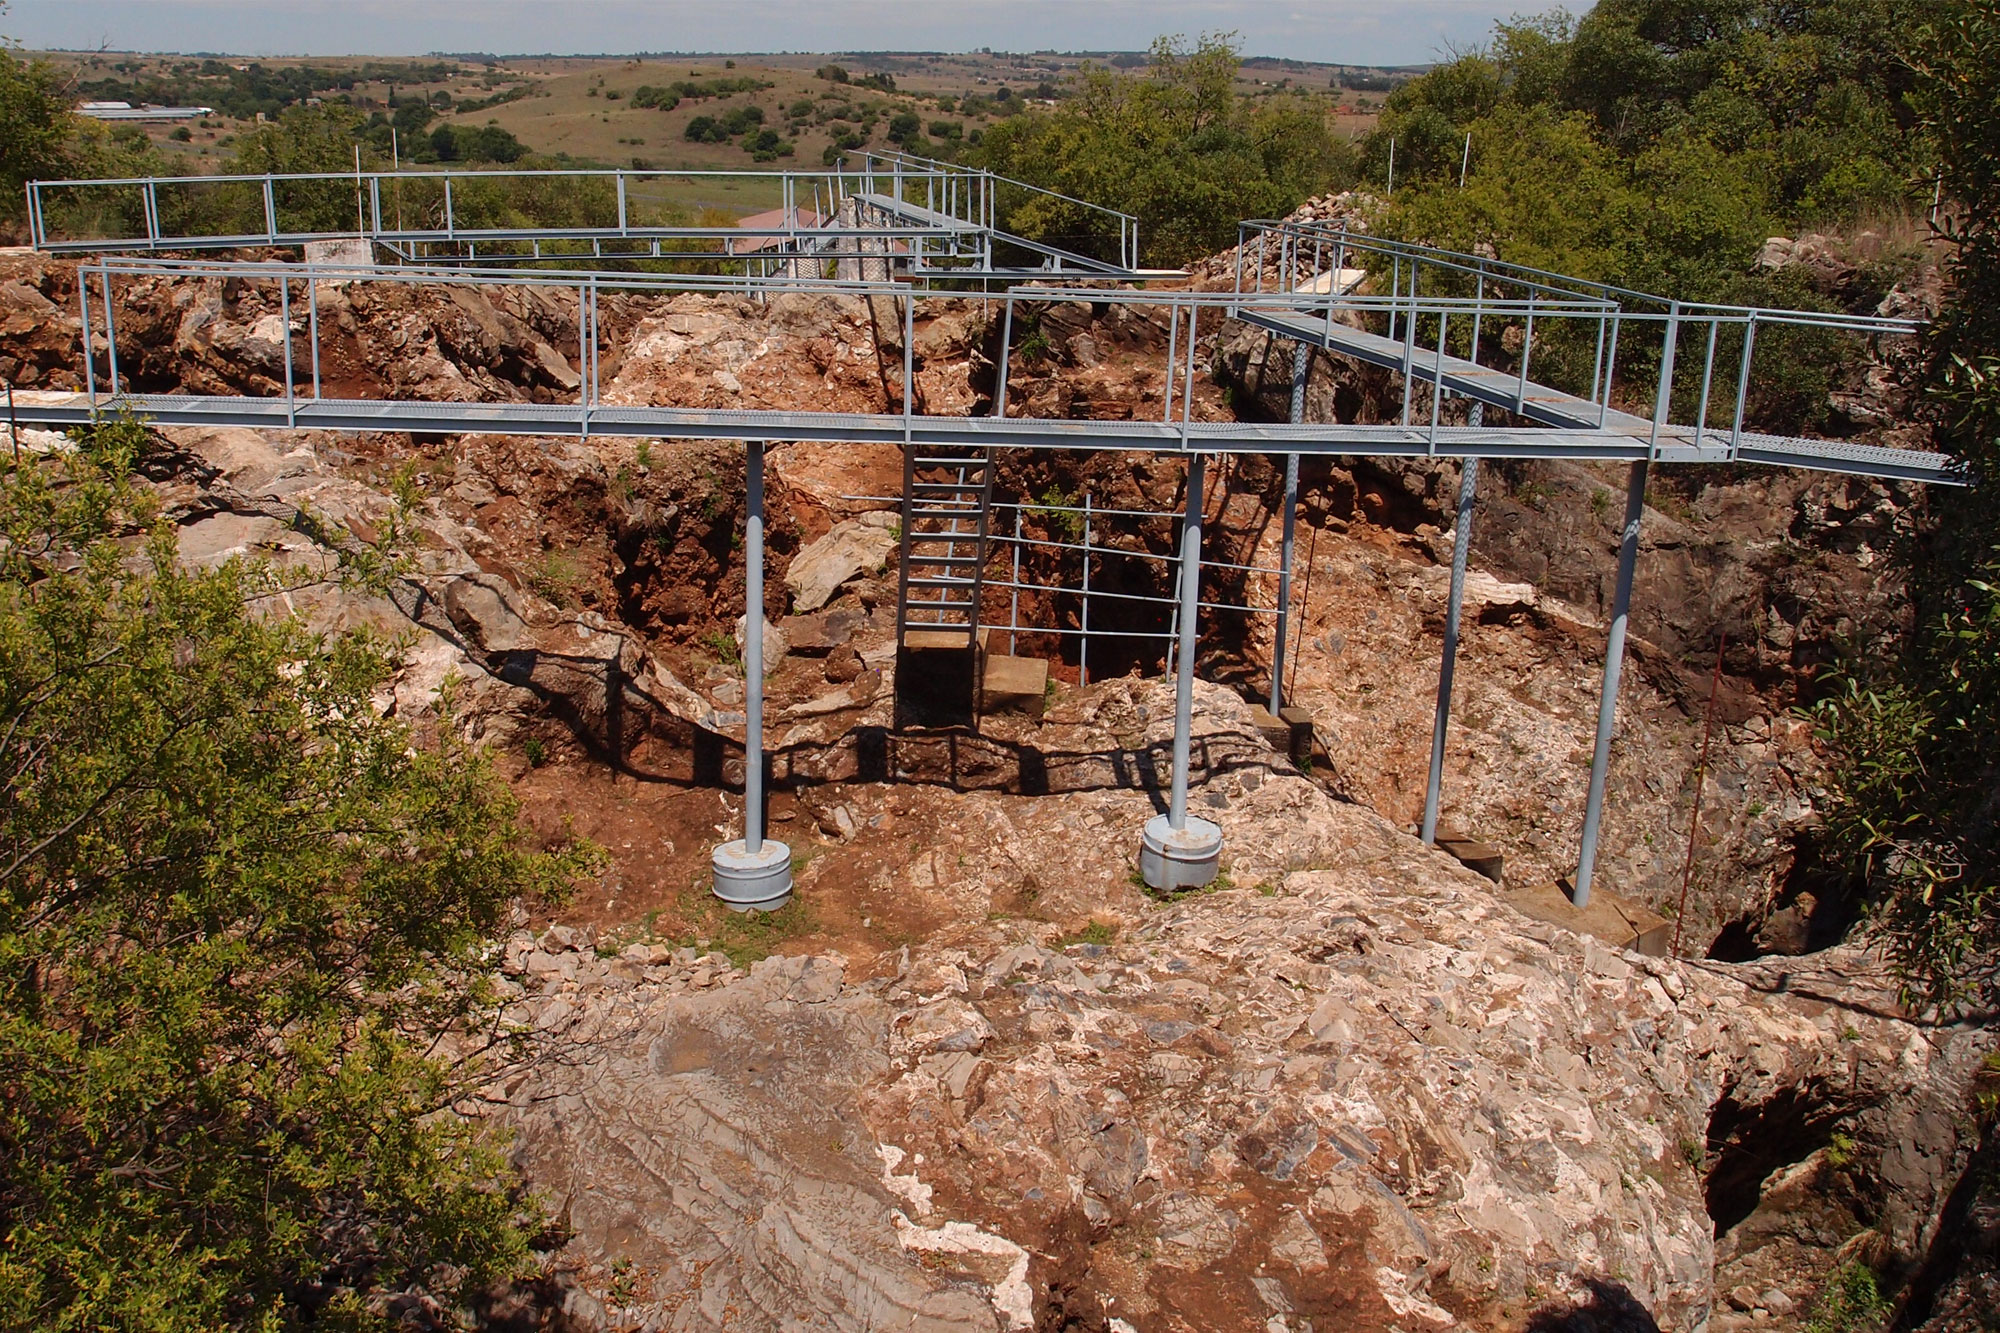 Sterkfontein site view (where the fossils were located)